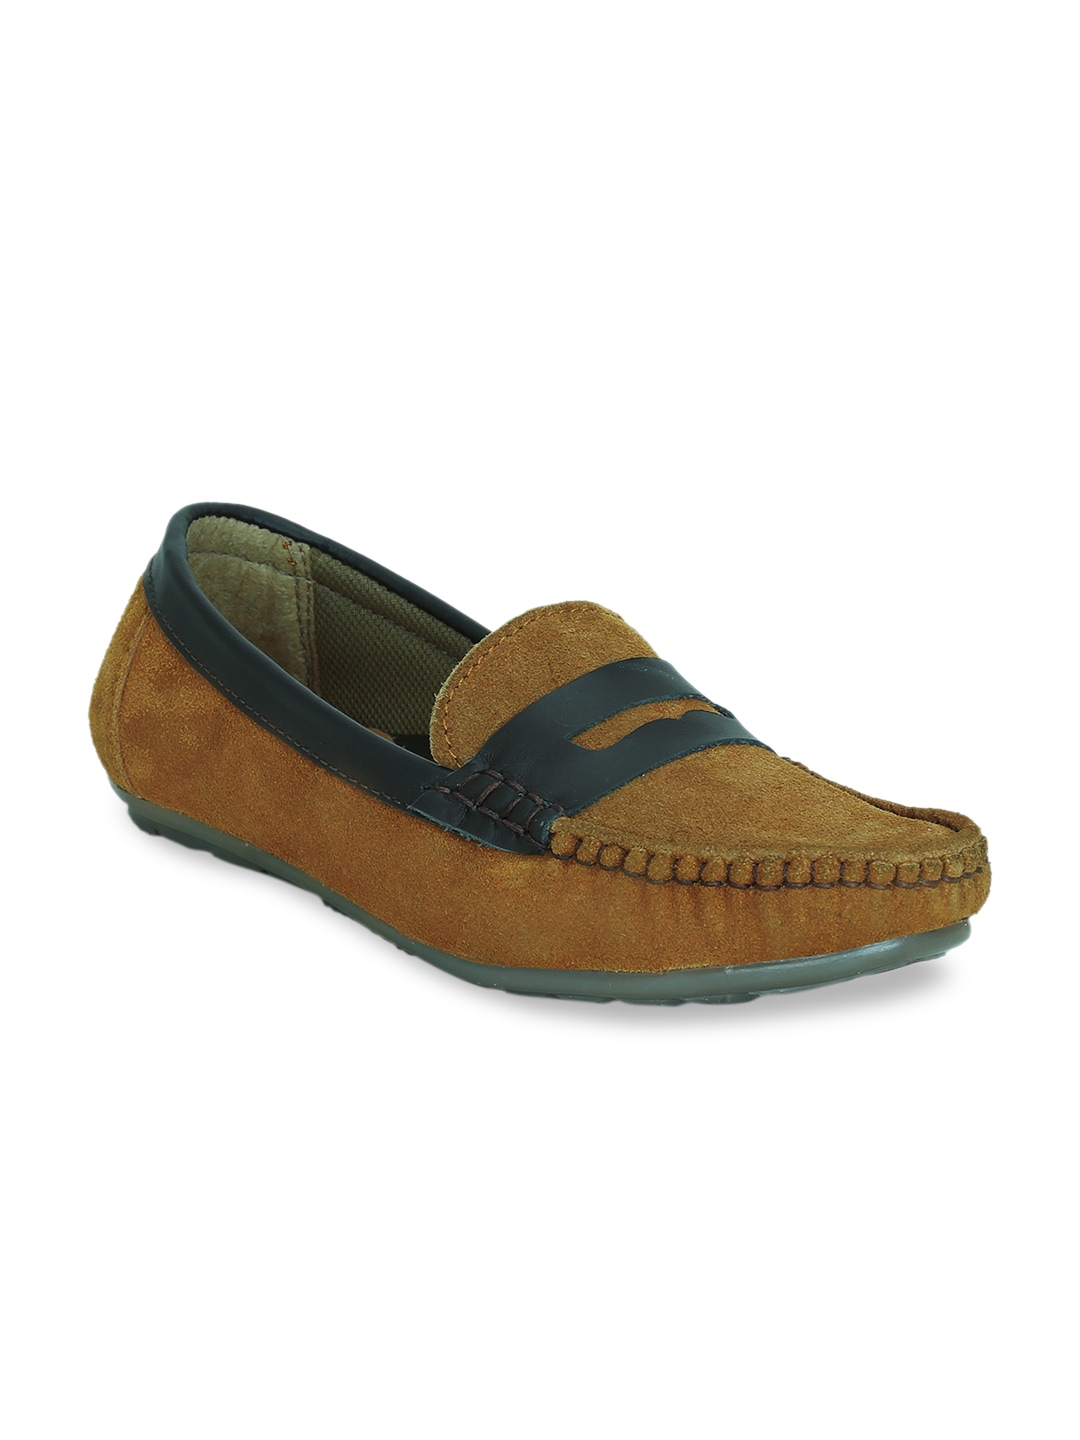 Get Glamr Women Tan Brown & Blue Suede Loafers Price in India